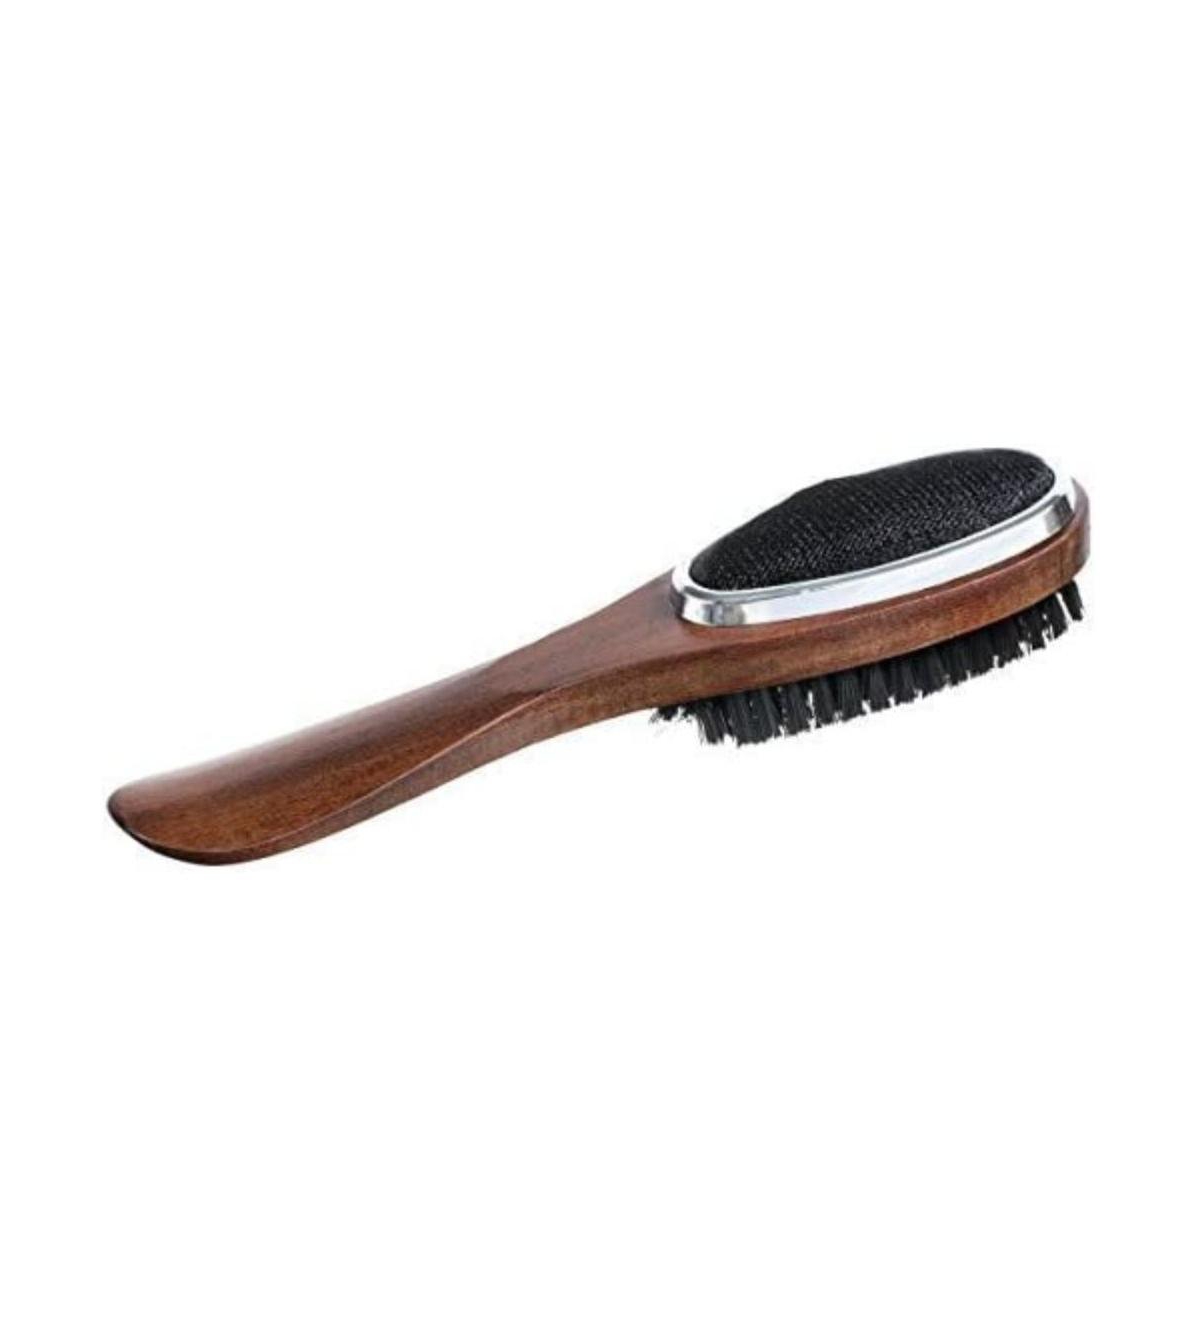 3 in 1 Clothes Brushes Garment Care Clothes Brush and lint Remover - Lint Brush and Shoe Horn - Brown